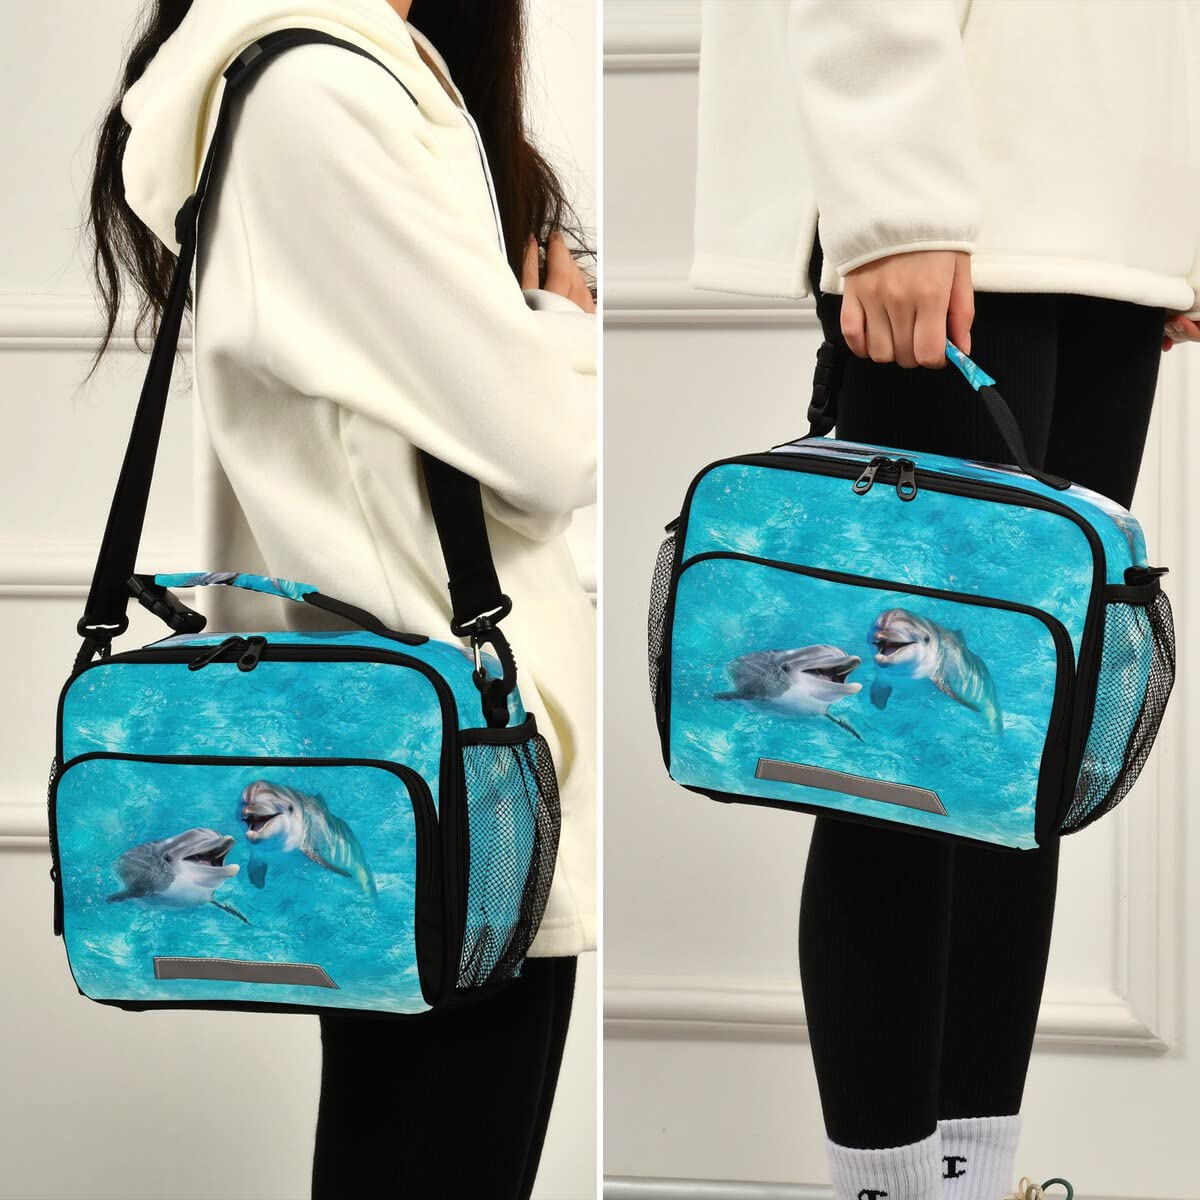 Exnundod Summer Dolphin Starfish Lunch Bag Underwater Beach Reusable Insulated Bags Cooler Lunch Tote Durable for Men Women Kids Adults